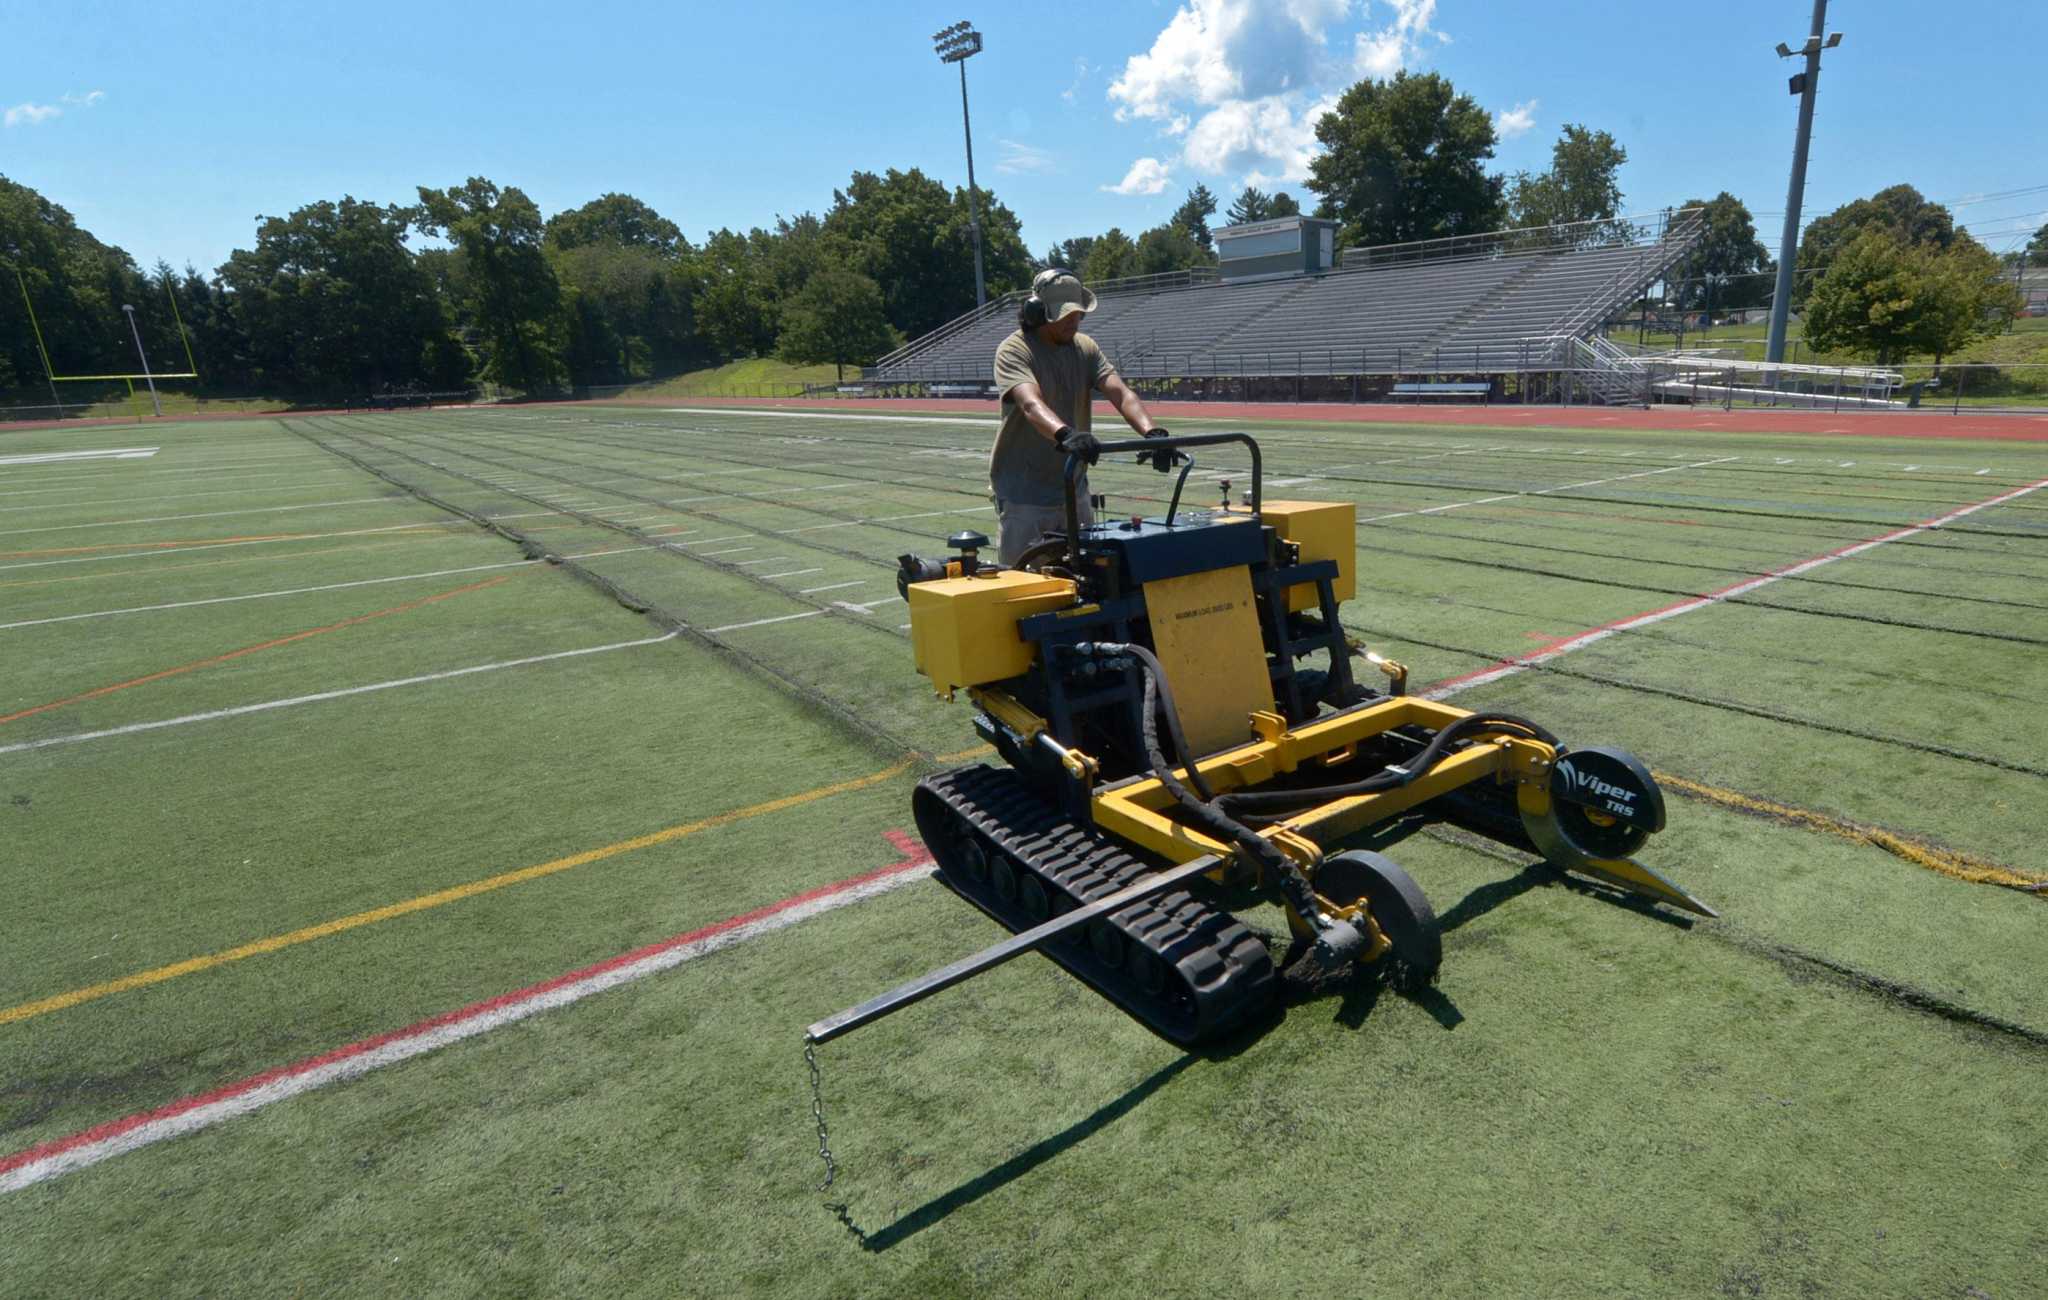 Cities can ban turf grass